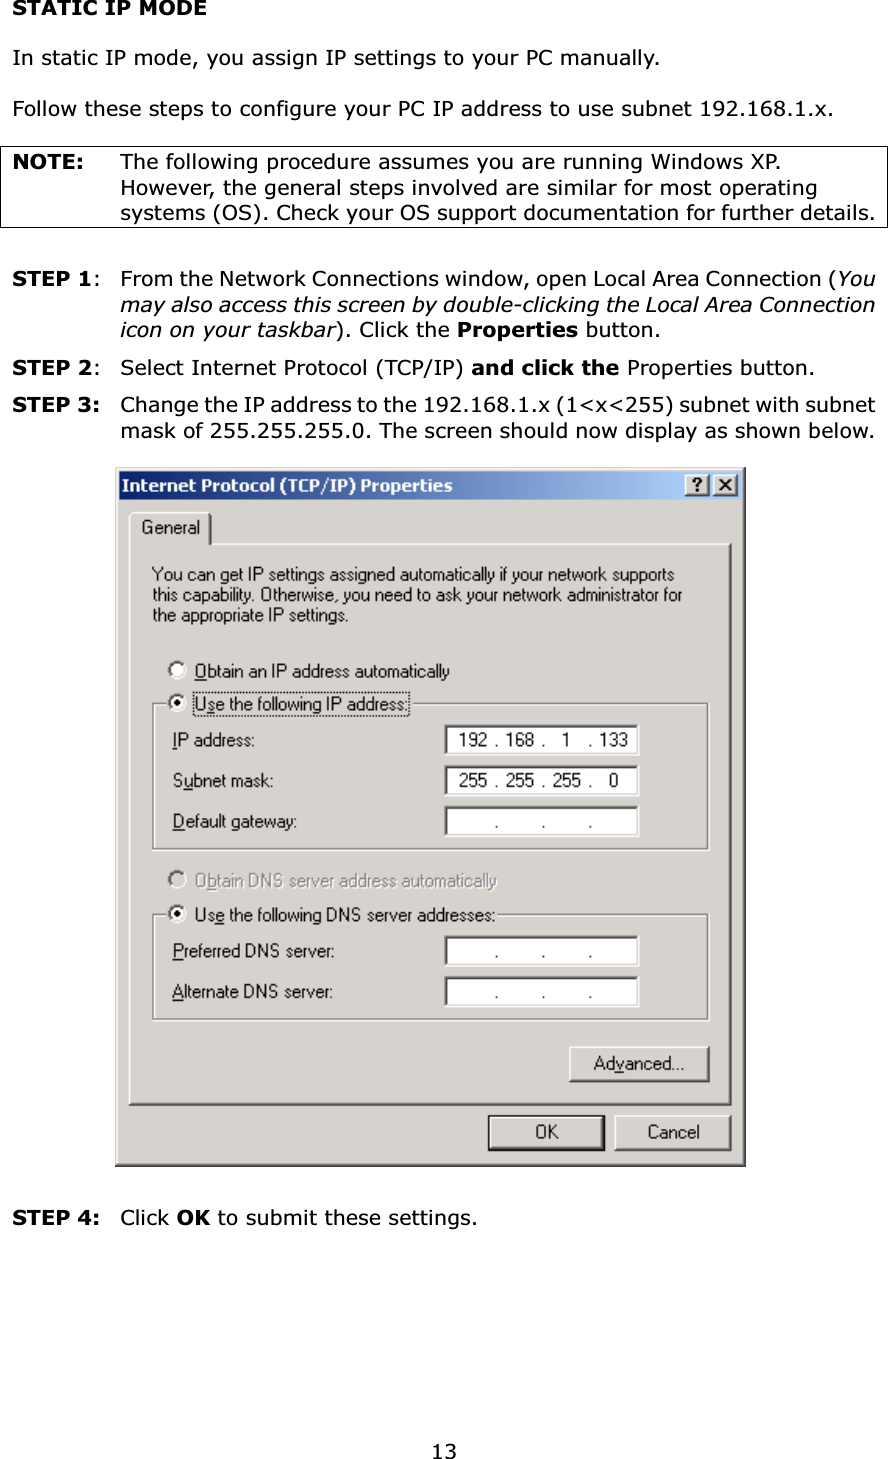  13STATIC IP MODE  In static IP mode, you assign IP settings to your PC manually.  Follow these steps to configure your PC IP address to use subnet 192.168.1.x.  NOTE:  The following procedure assumes you are running Windows XP.   However, the general steps involved are similar for most operating systems (OS). Check your OS support documentation for further details.  STEP 1:  From the Network Connections window, open Local Area Connection (You may also access this screen by double-clicking the Local Area Connection icon on your taskbar). Click the Properties button. STEP 2:  Select Internet Protocol (TCP/IP) and click the Properties button. STEP 3:  Change the IP address to the 192.168.1.x (1&lt;x&lt;255) subnet with subnet mask of 255.255.255.0. The screen should now display as shown below.     STEP 4:   Click OK to submit these settings.  